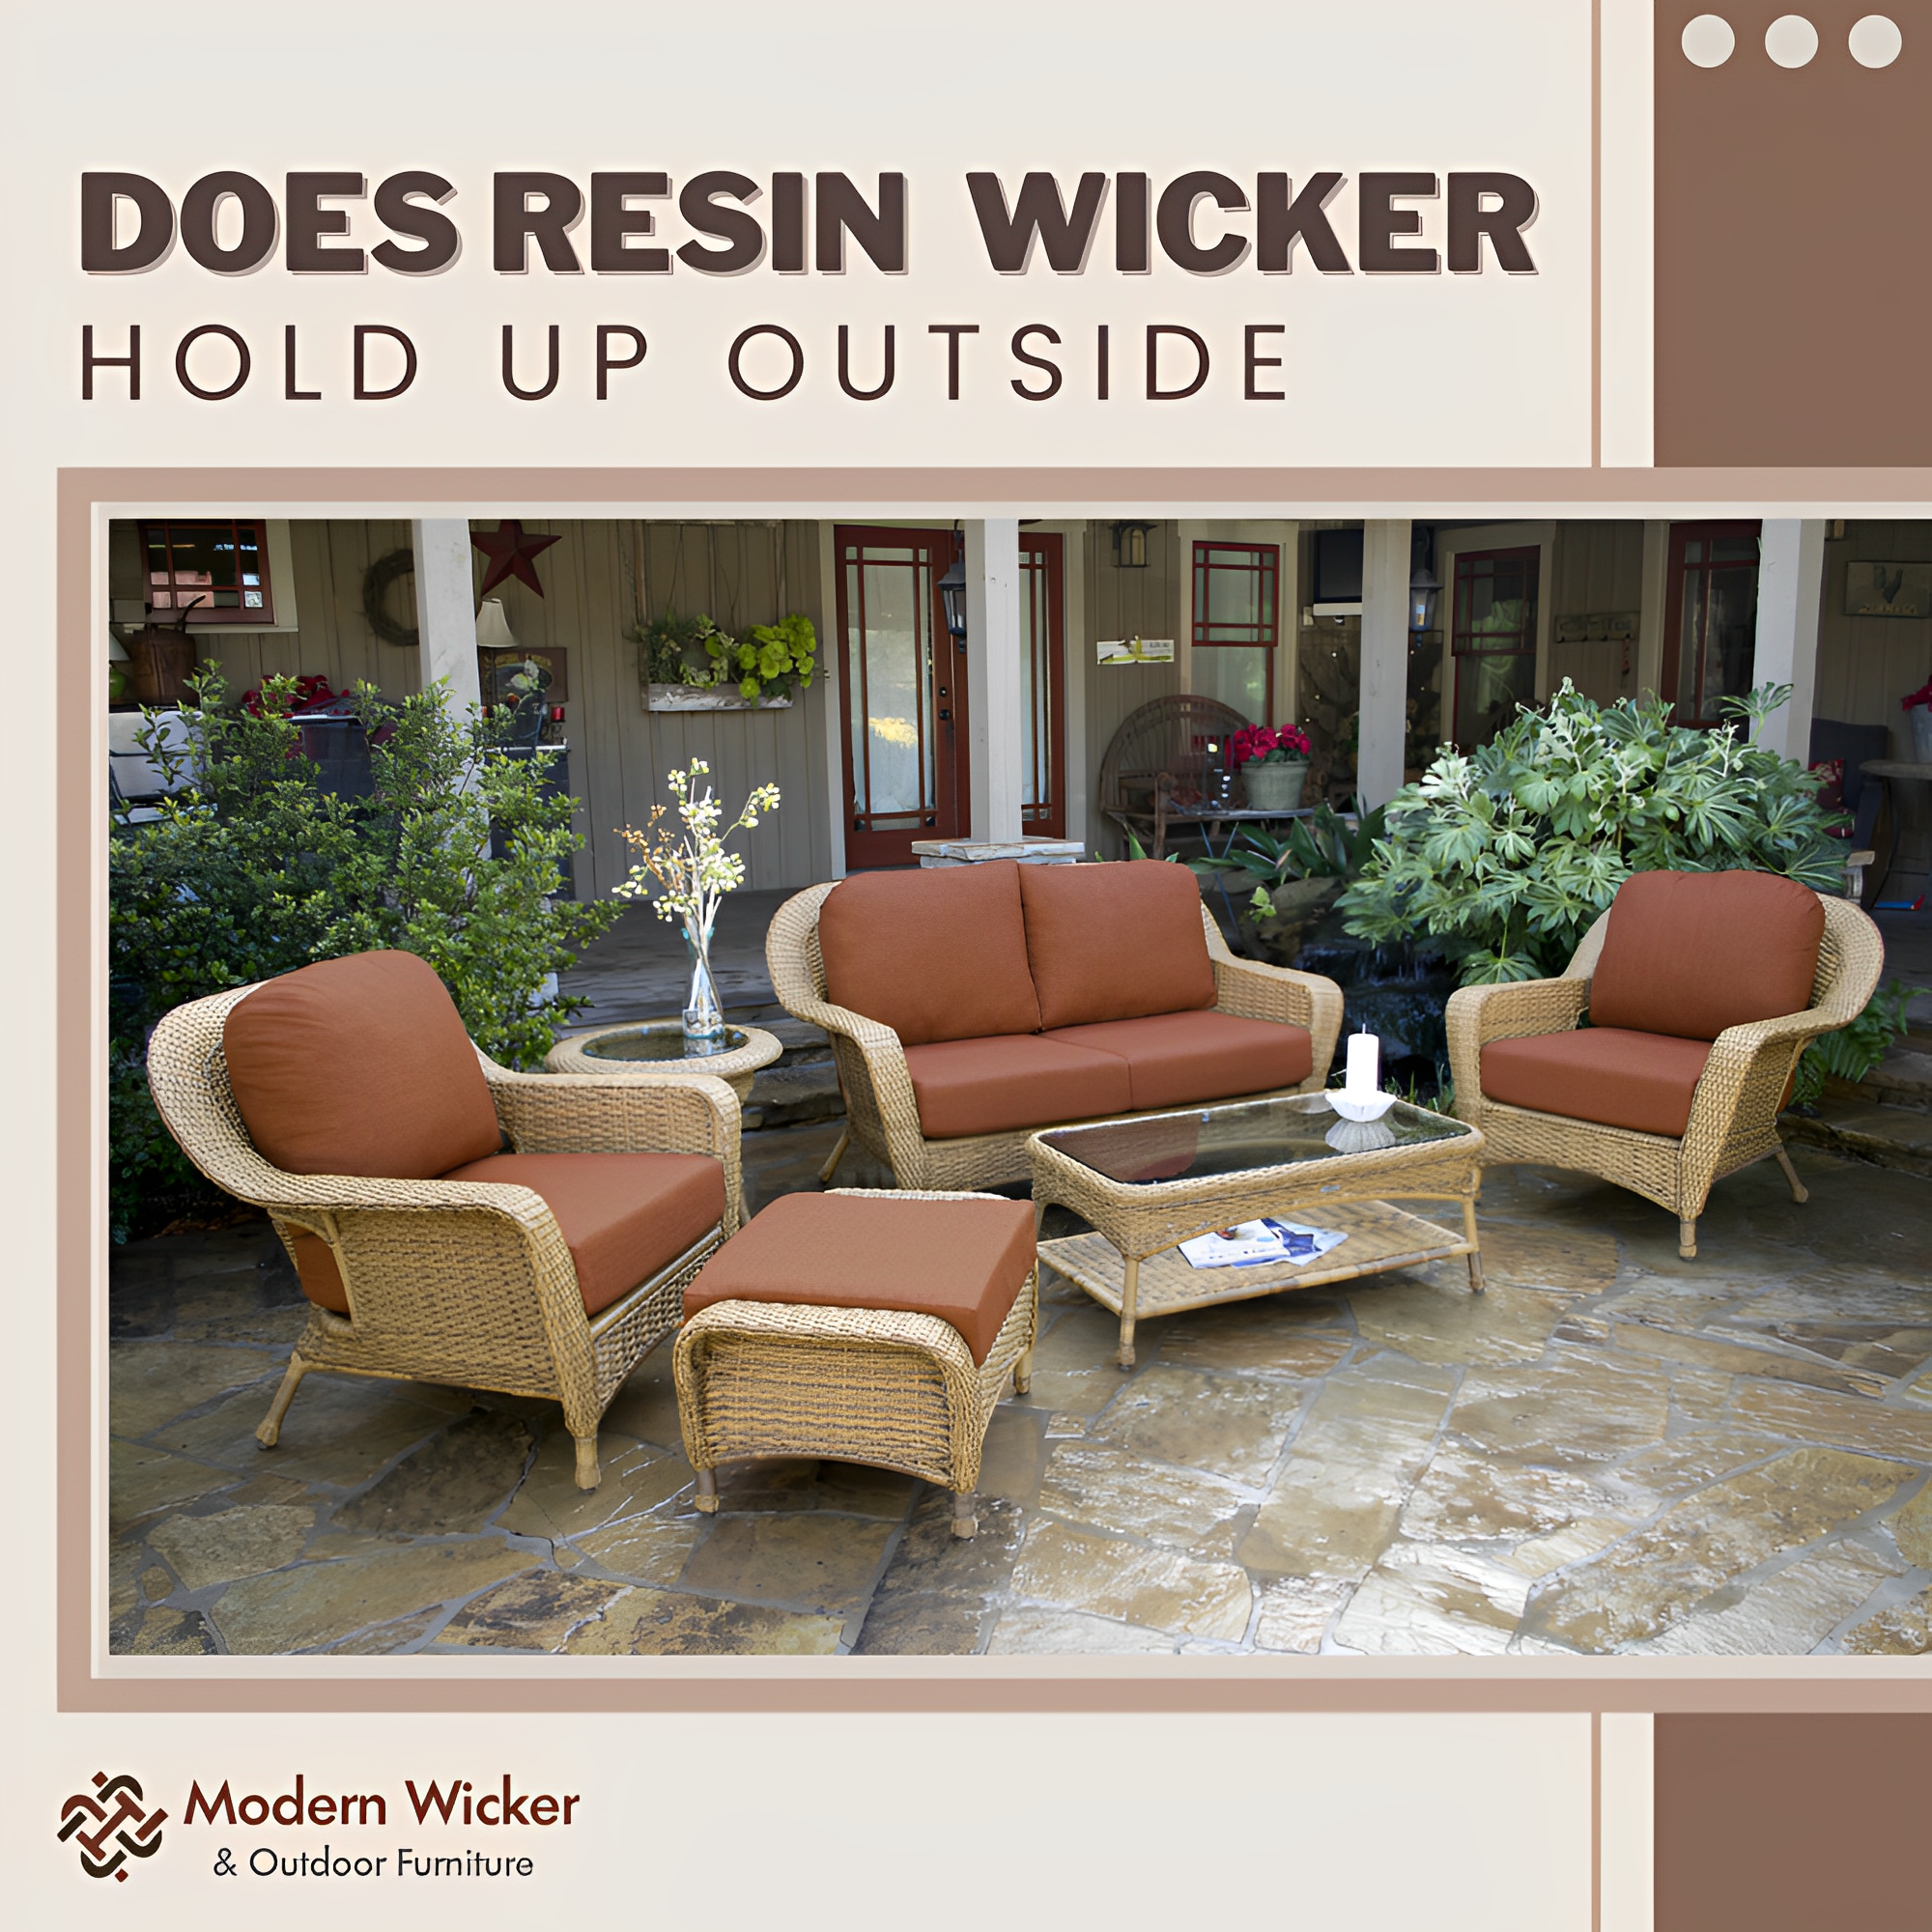 Does Resin Wicker Hold Up Outside?